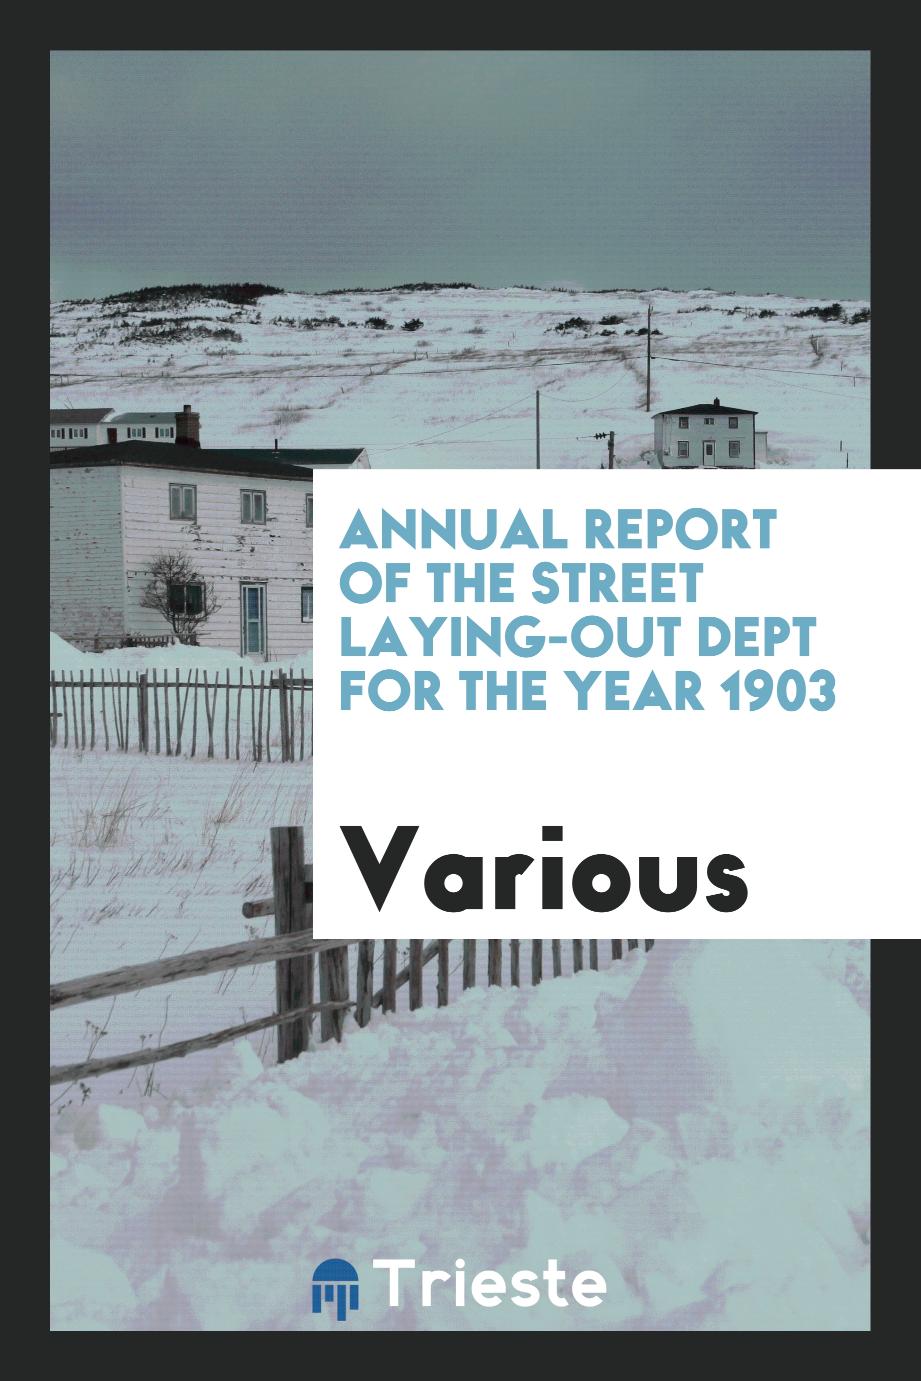 Annual Report of the Street Laying-Out Dept for the year 1903